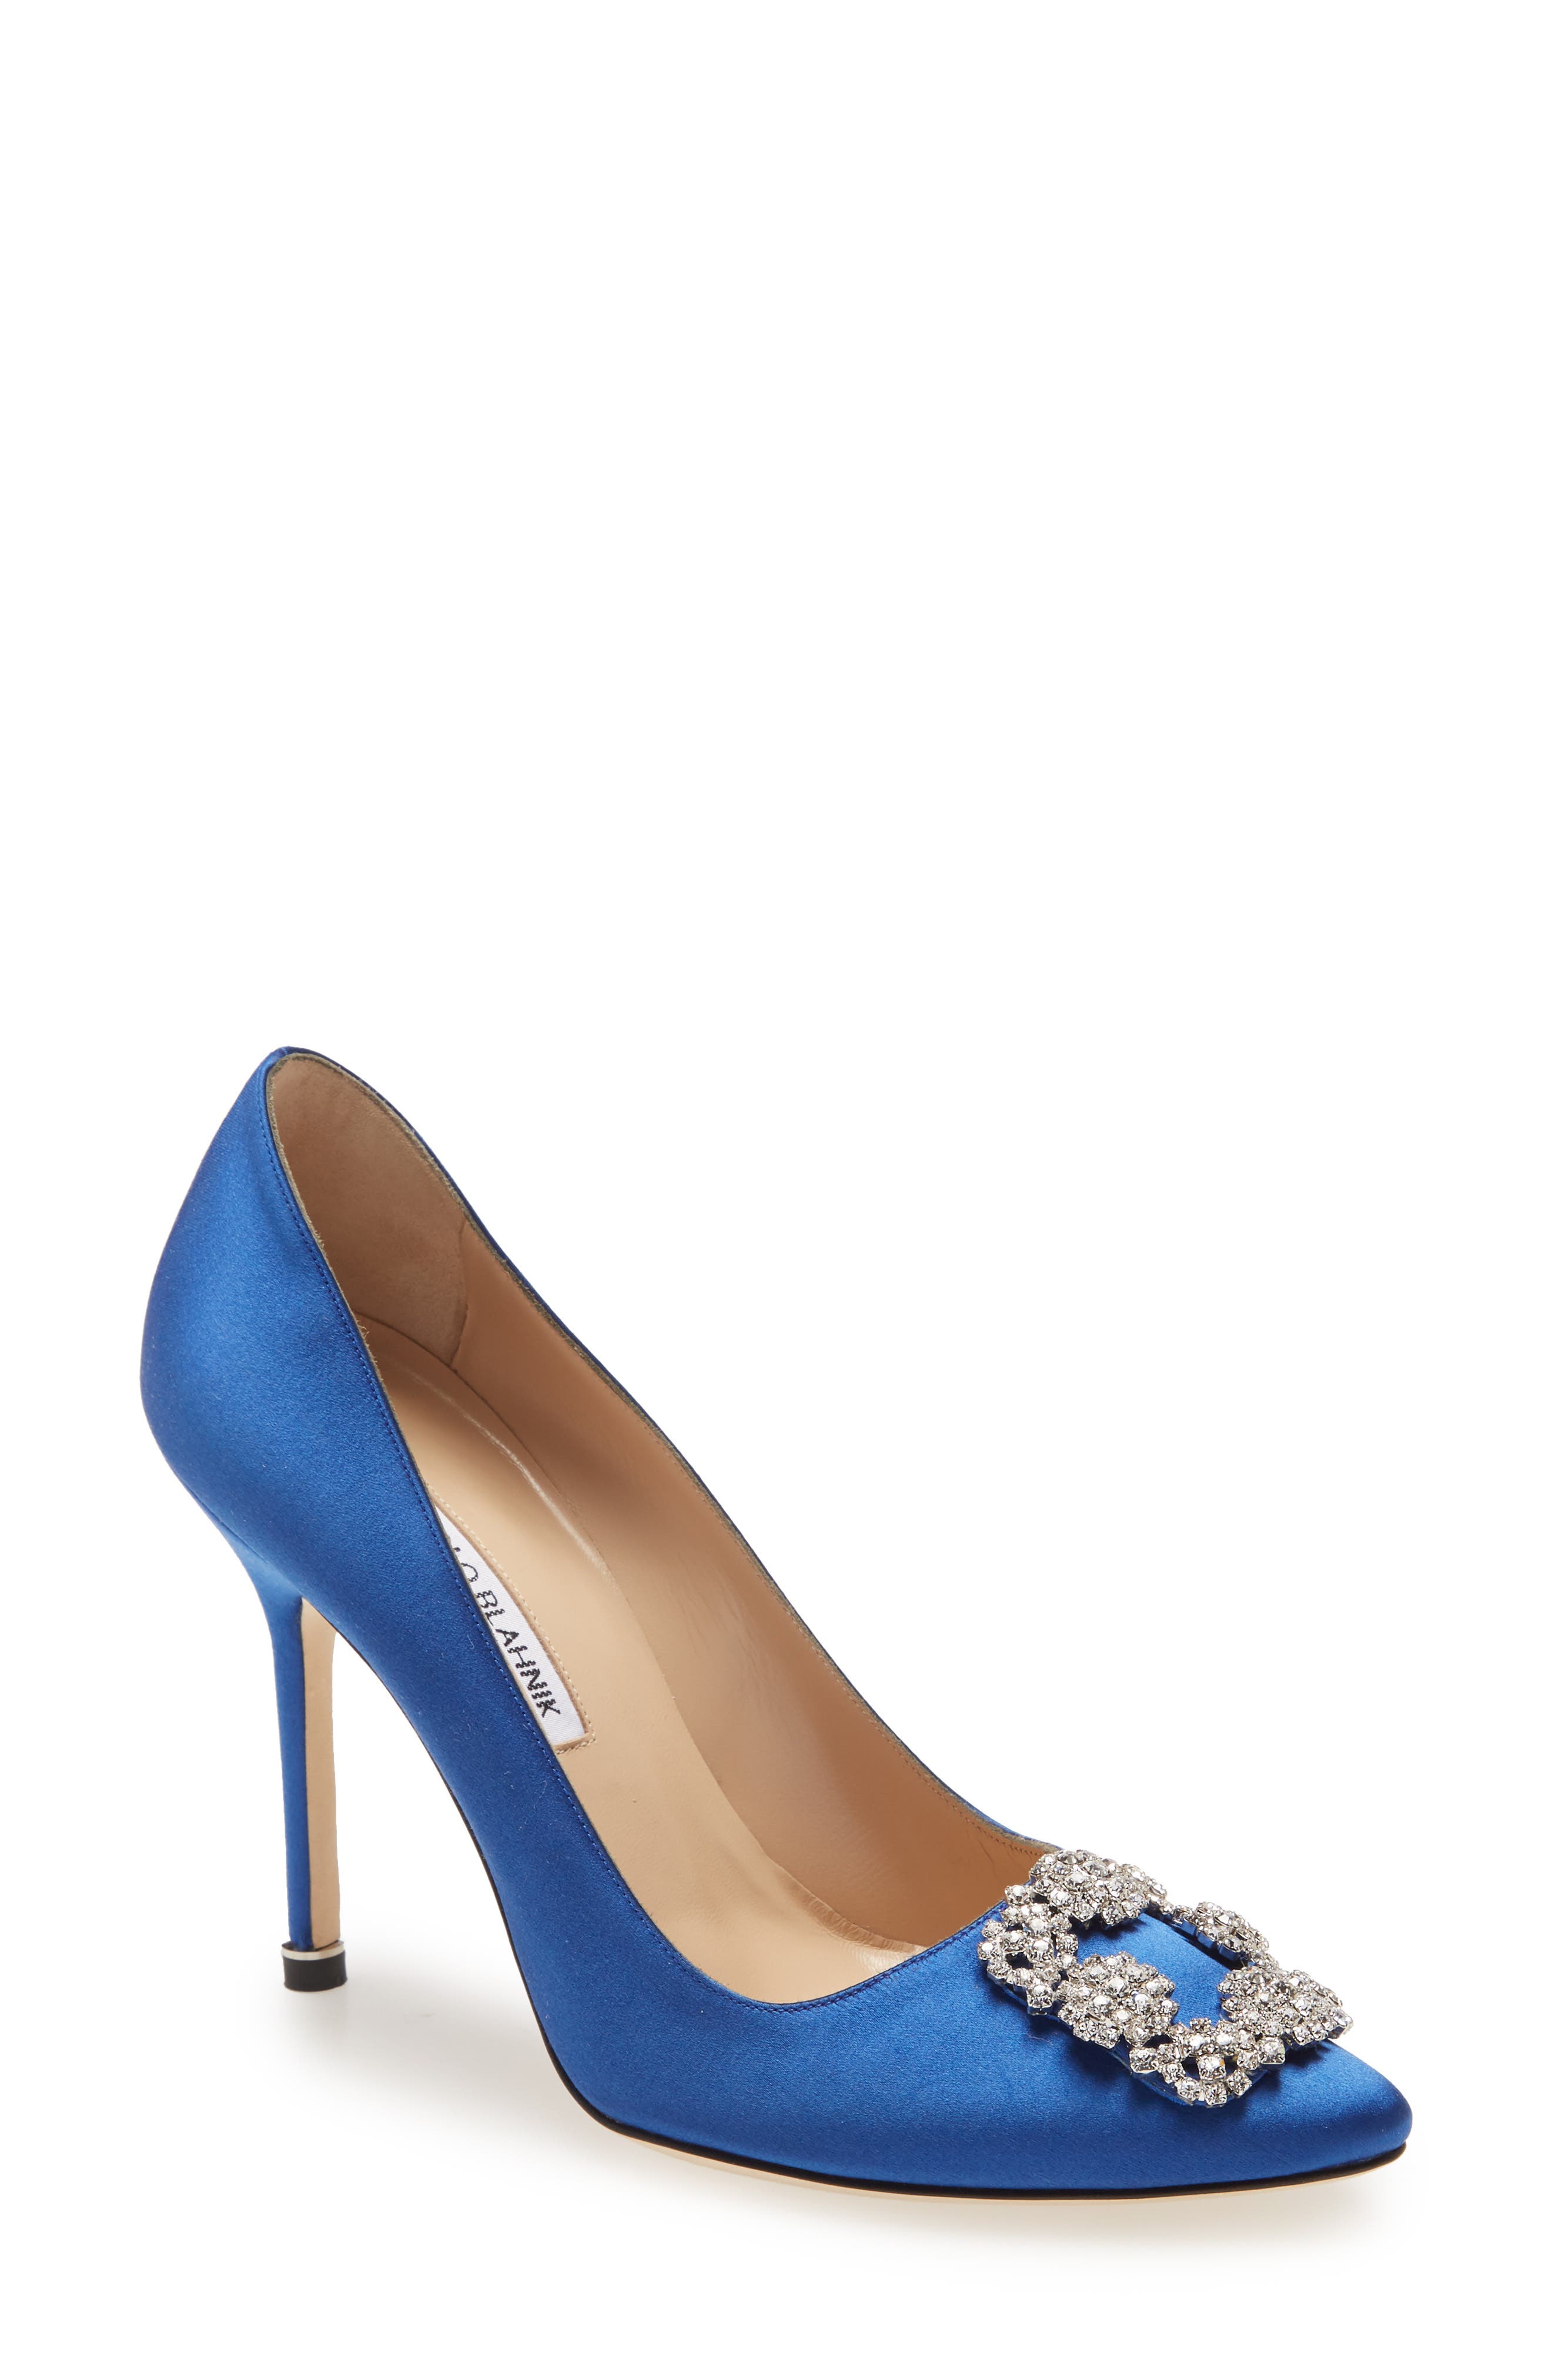 Manolo Blahnik Hangisi Pointed Toe Pump in Blue Satin/Clear at Nordstrom, Size 5.5Us